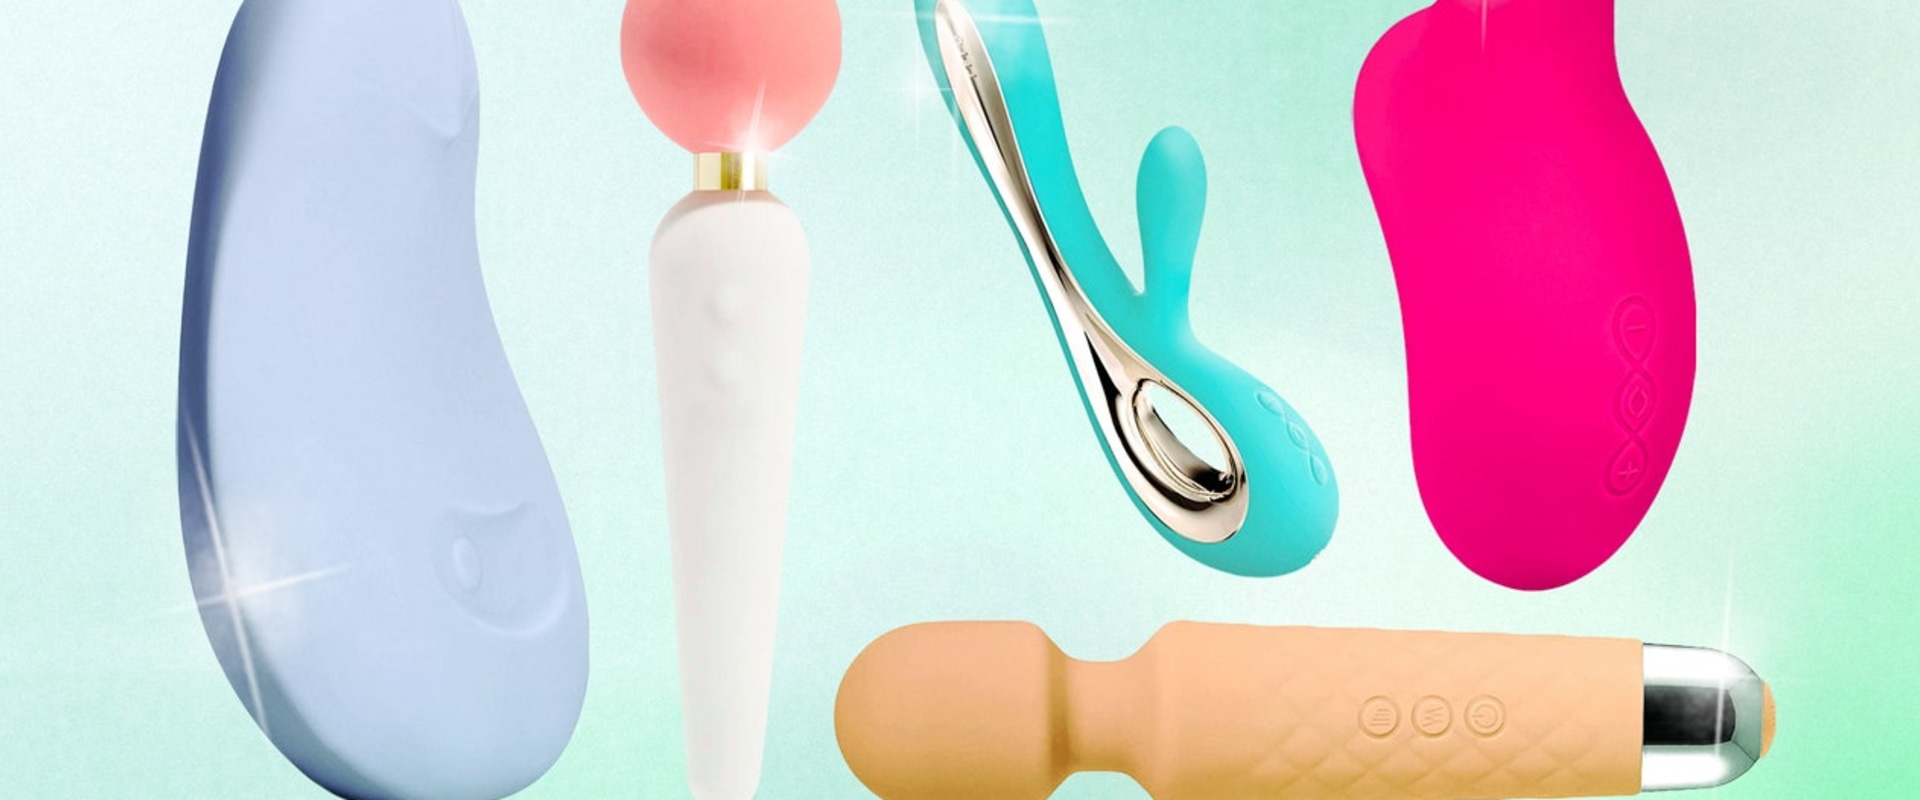 A Beginner's Guide to Vibrators for Couples